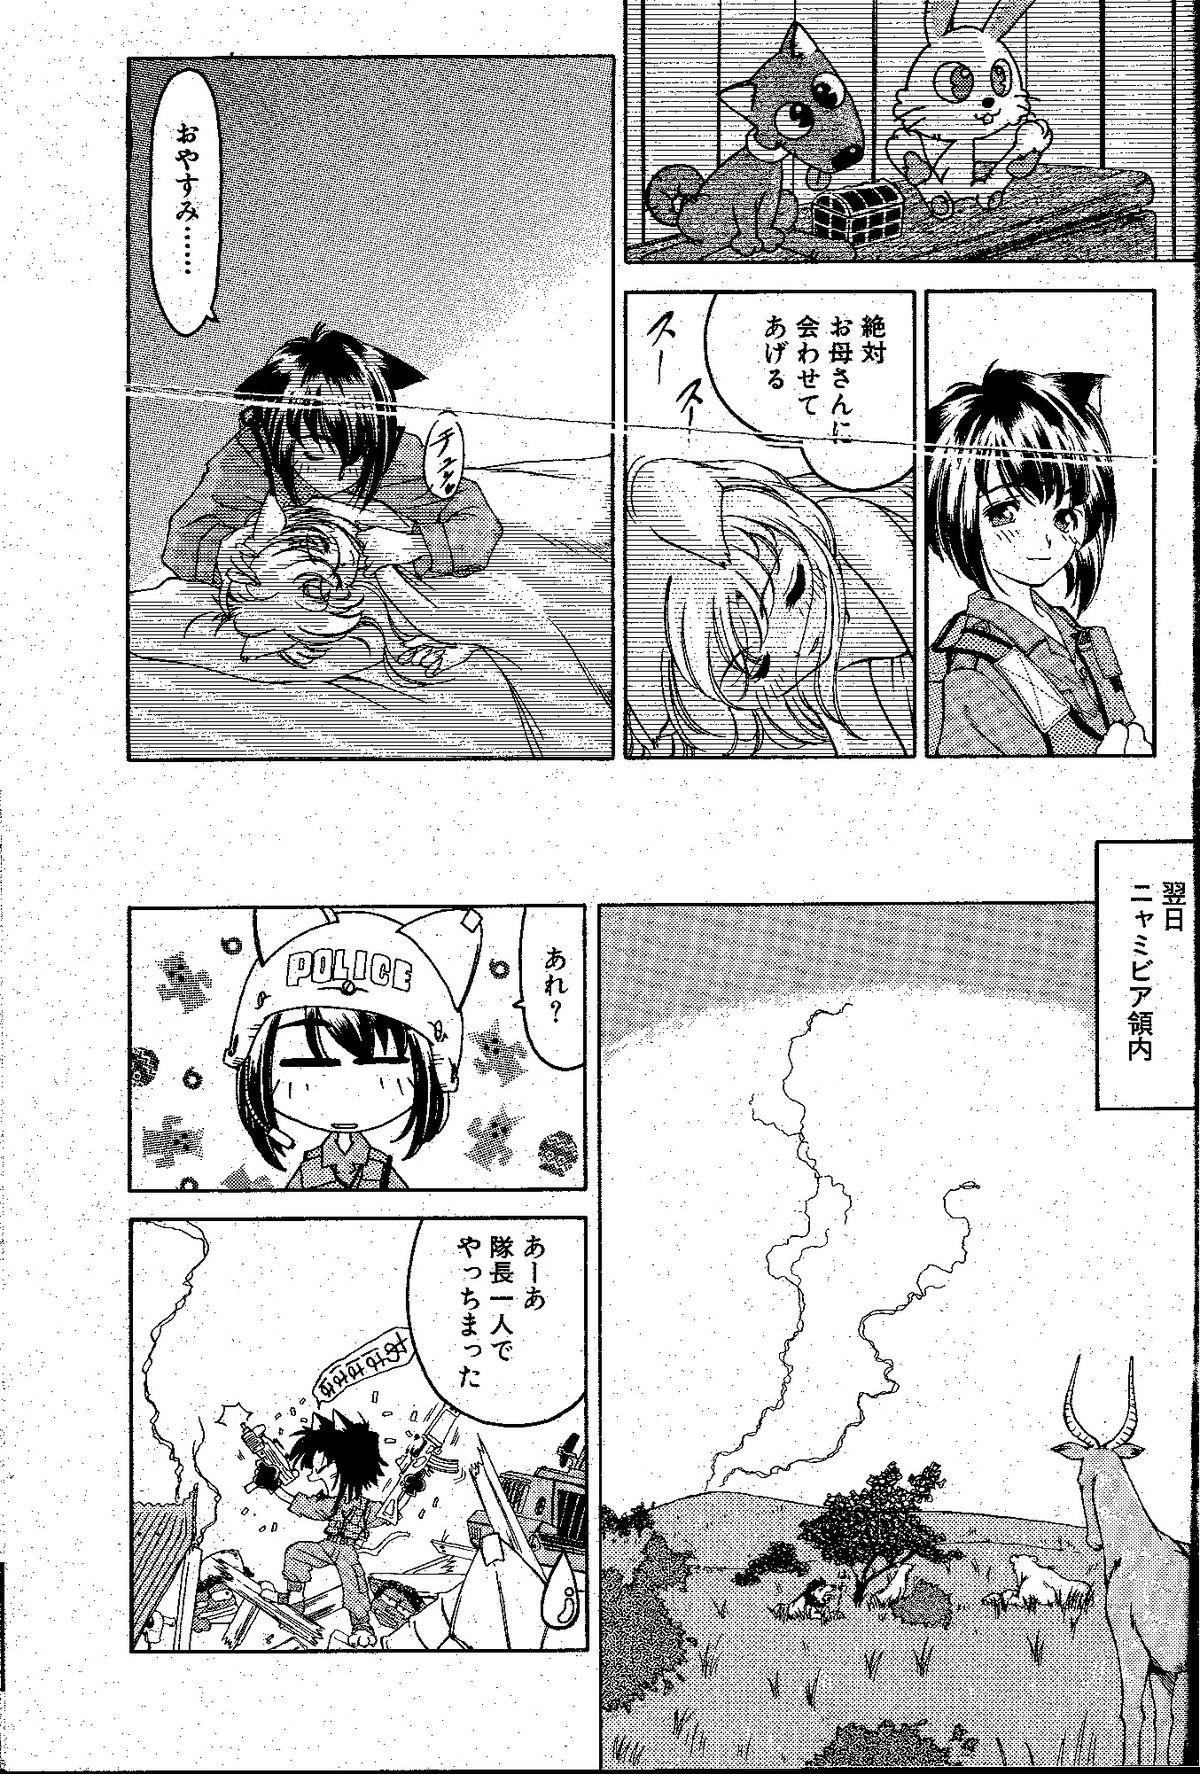 nyan-a-kore [Last page has imperfect lines] 14